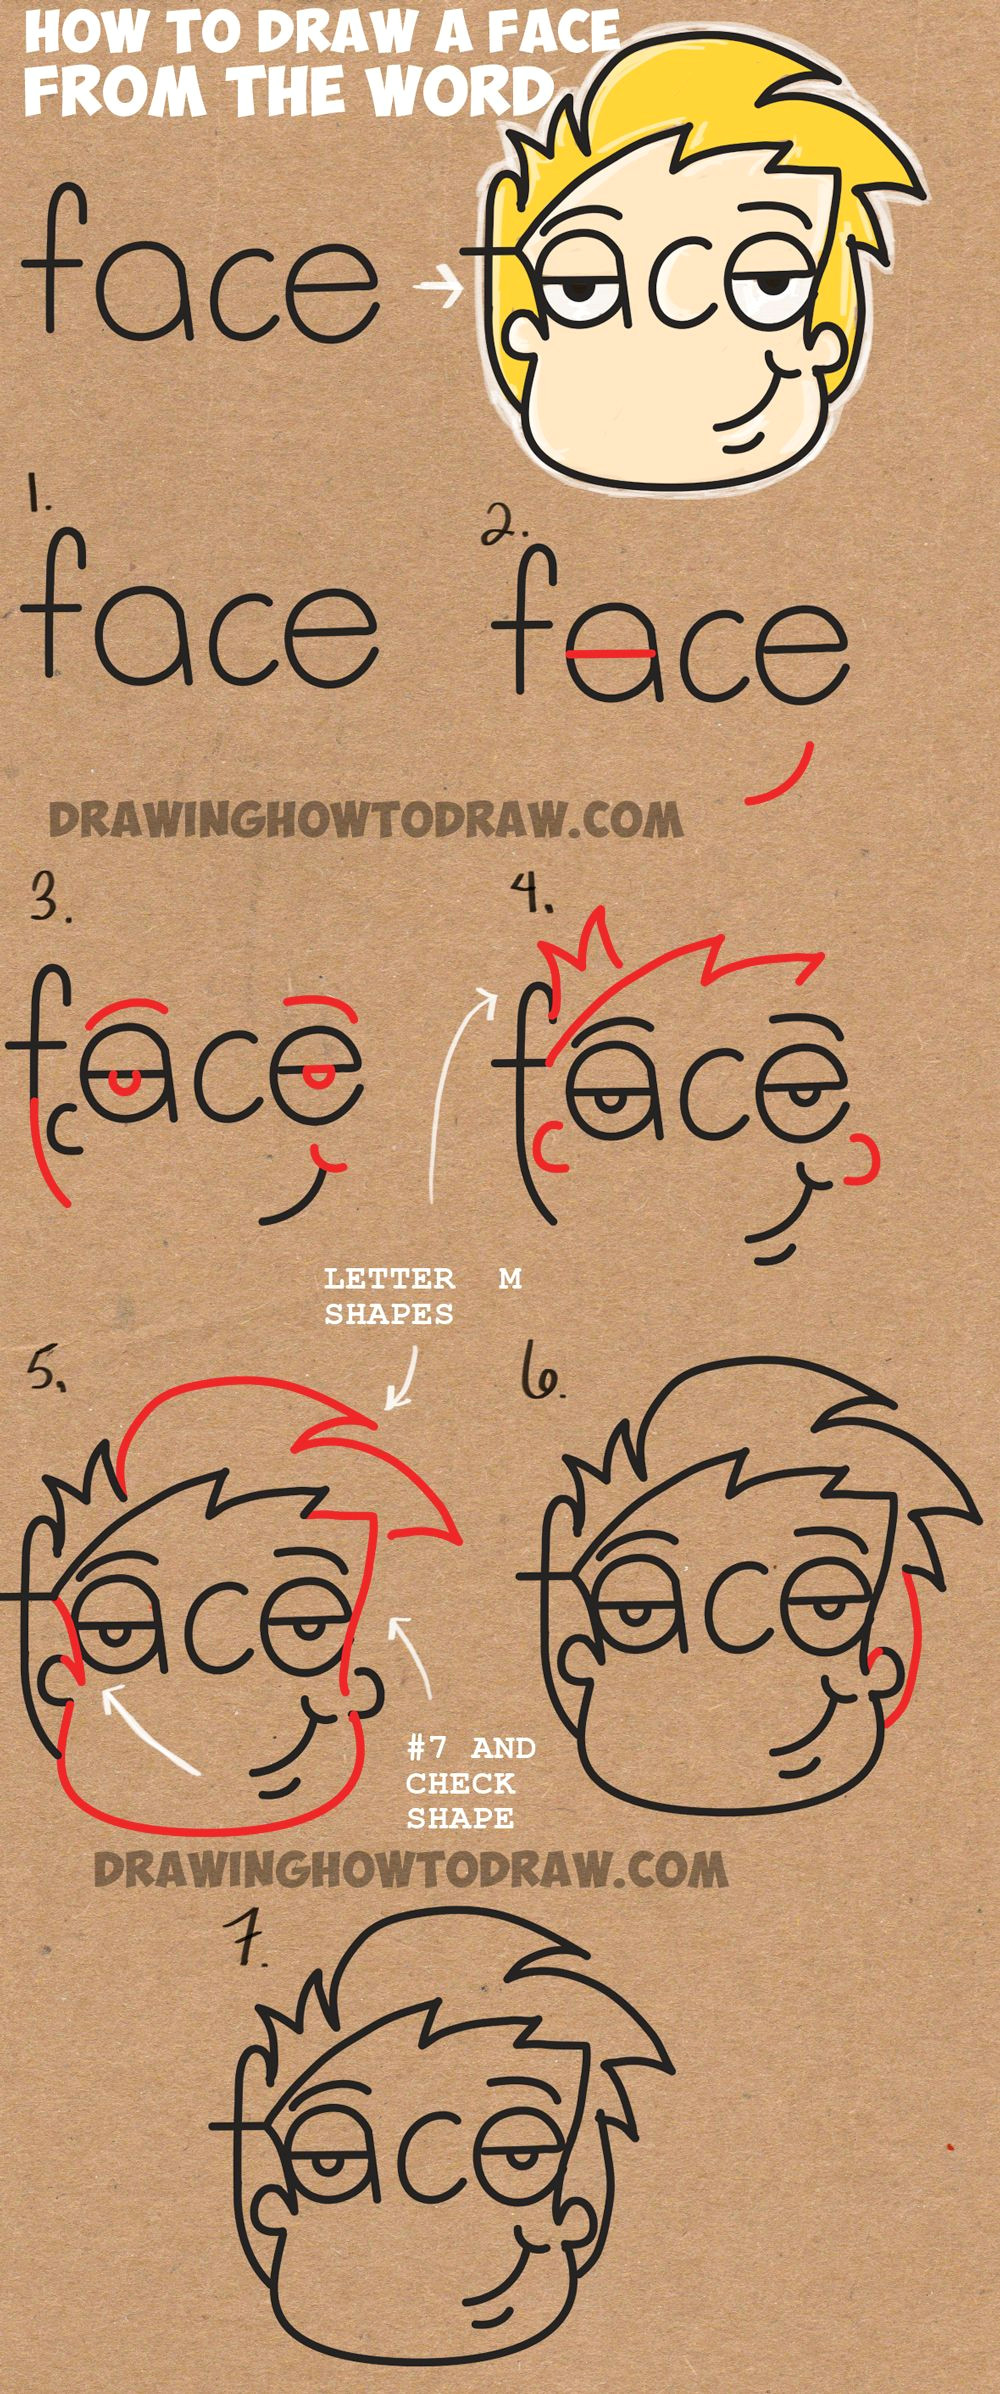 Drawing 7 Letters How to Draw Cartoon Faces From the Word Face Easy Step by Step